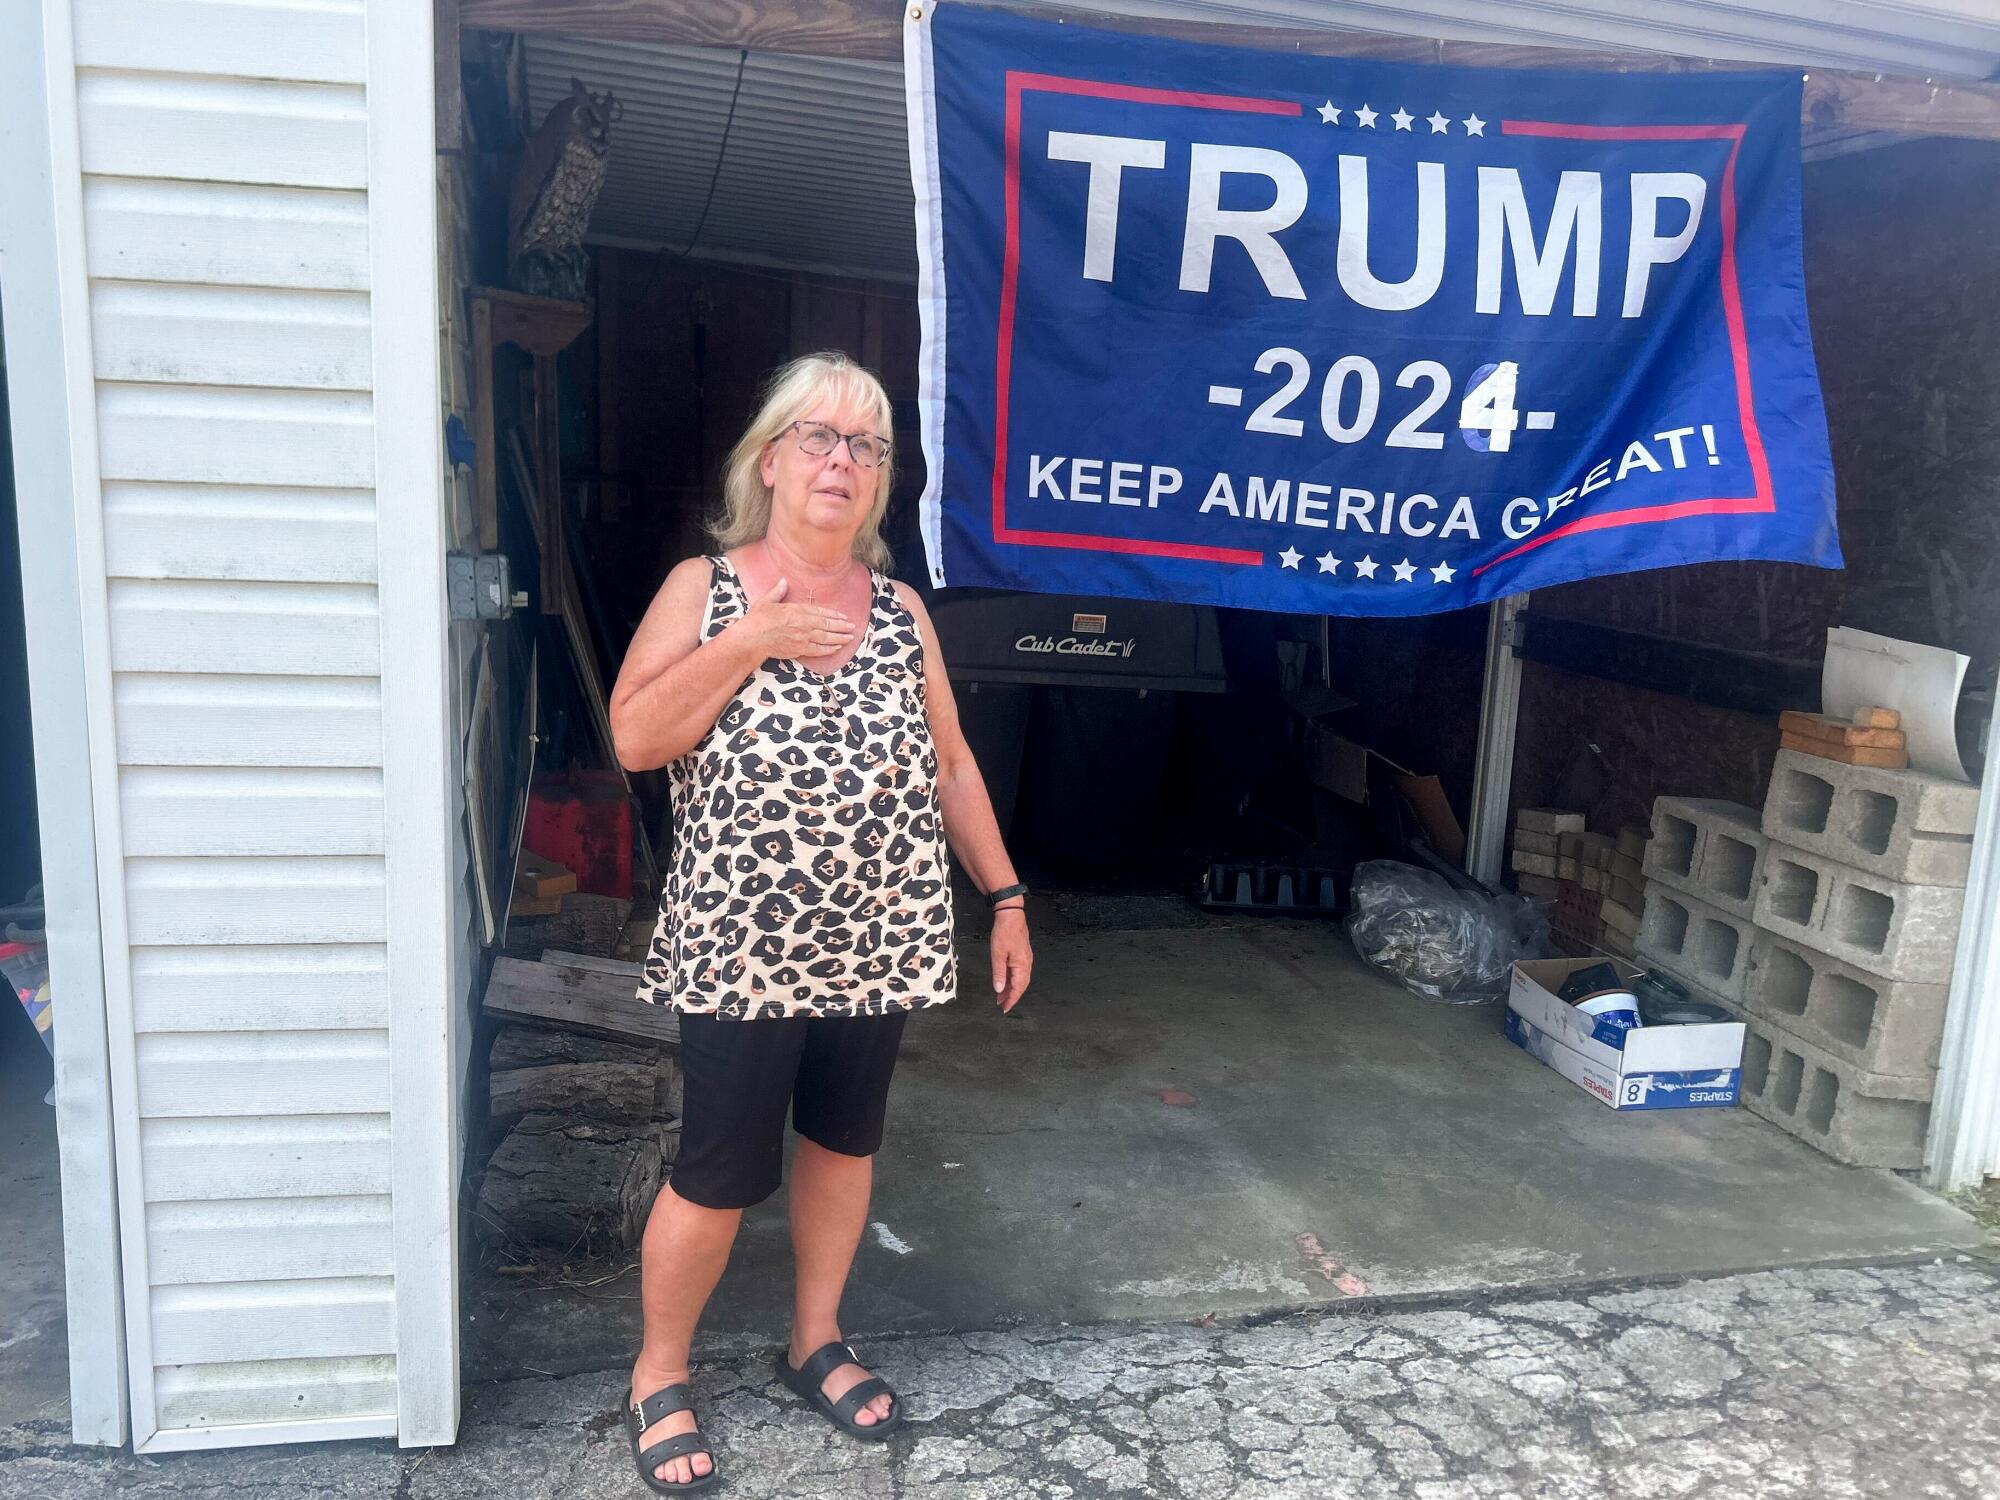 A woman stands in front of a garage with a "Trump 2024" banner.